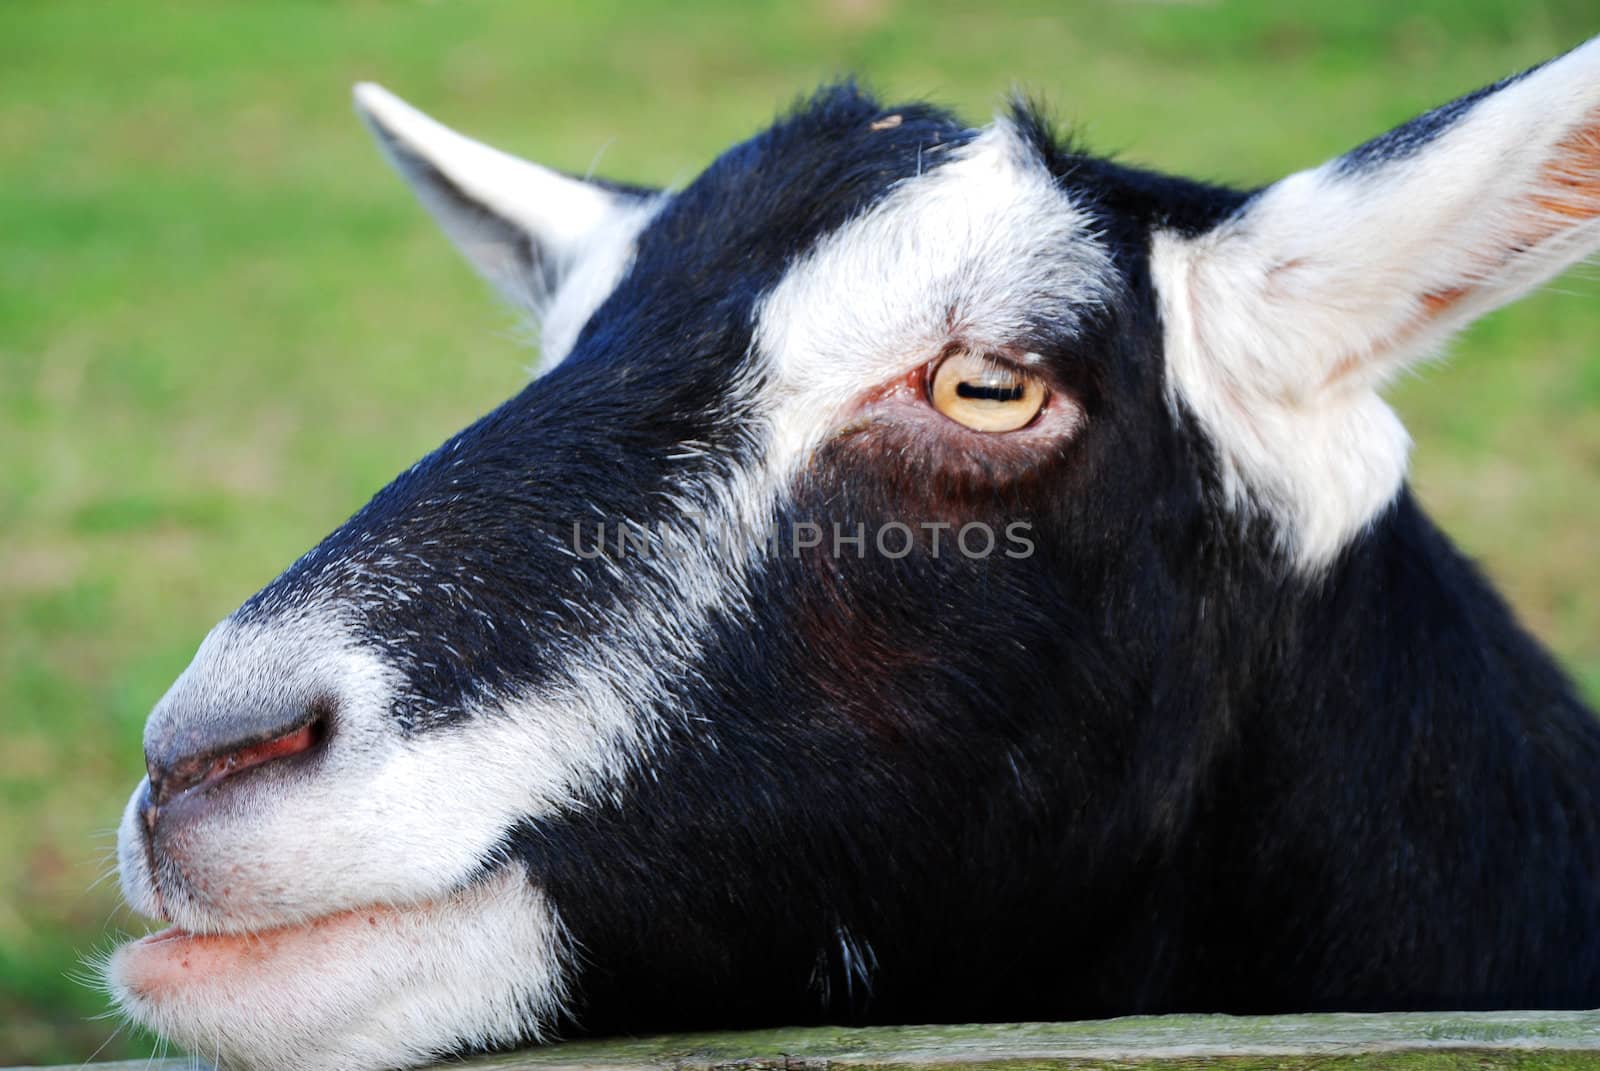 A photograph of the head and face of a goat leaning on a fence